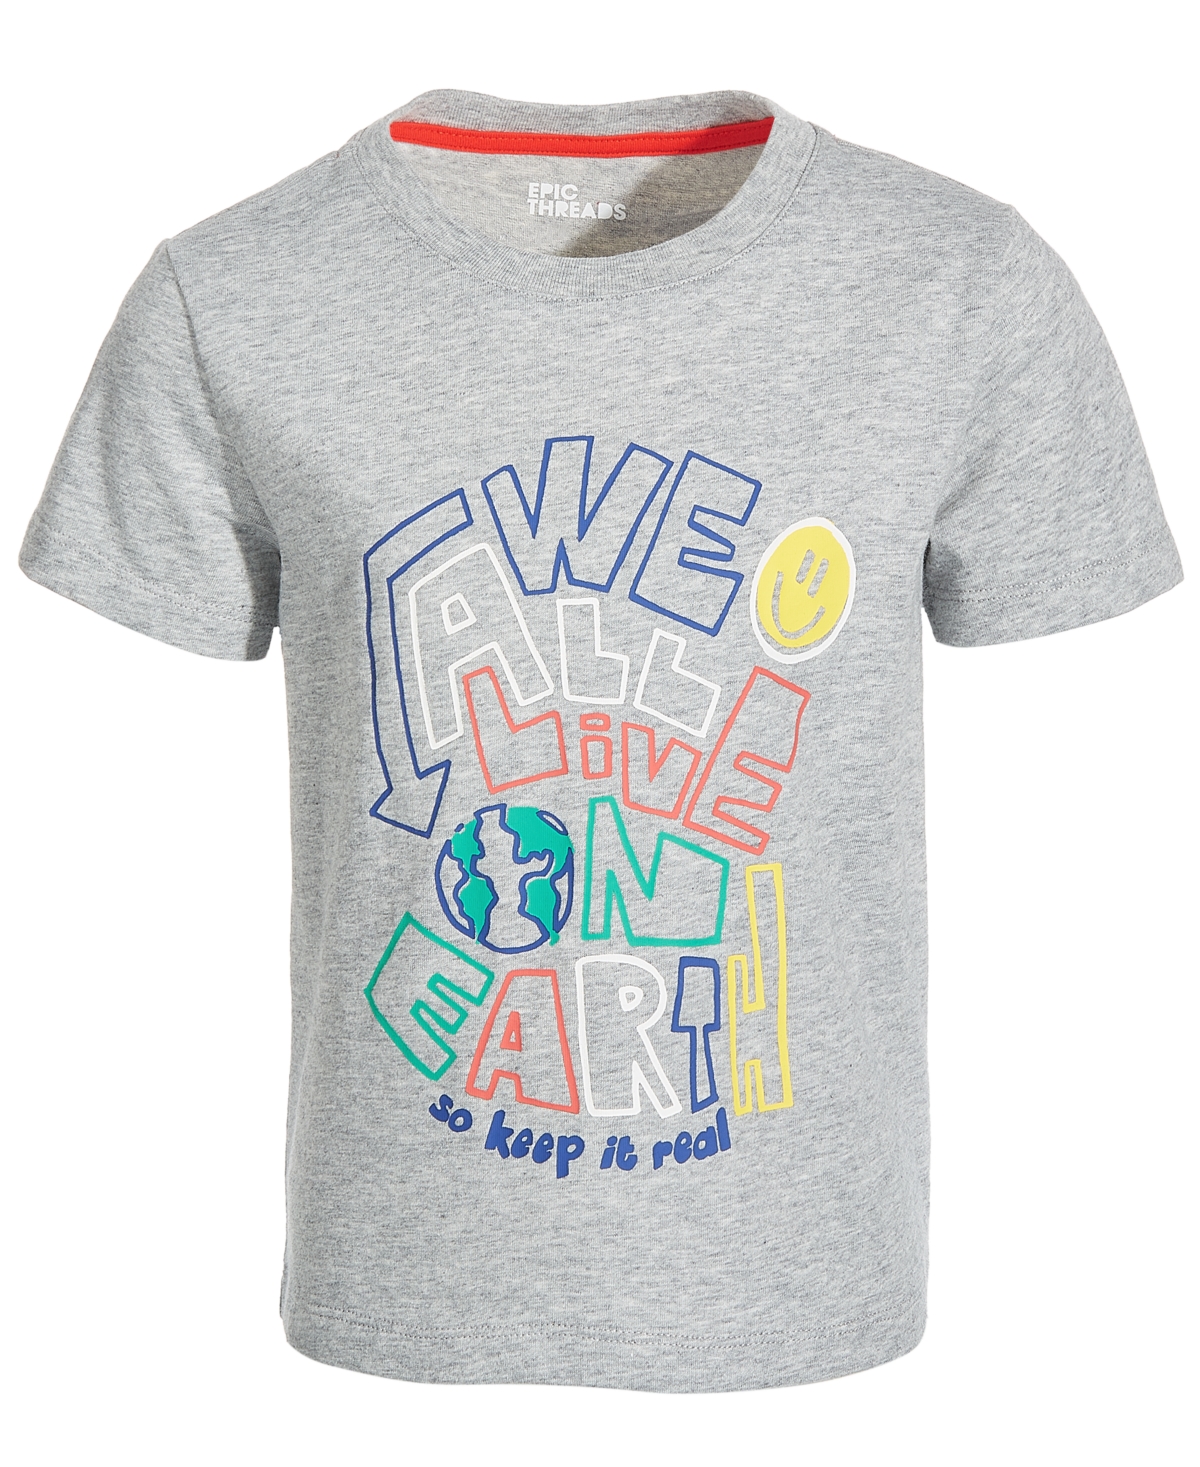 Epic Threads Kids' Toddler & Little Boys We All Live On Earth Graphic T-shirt, Created For Macy's In Saturn Blue